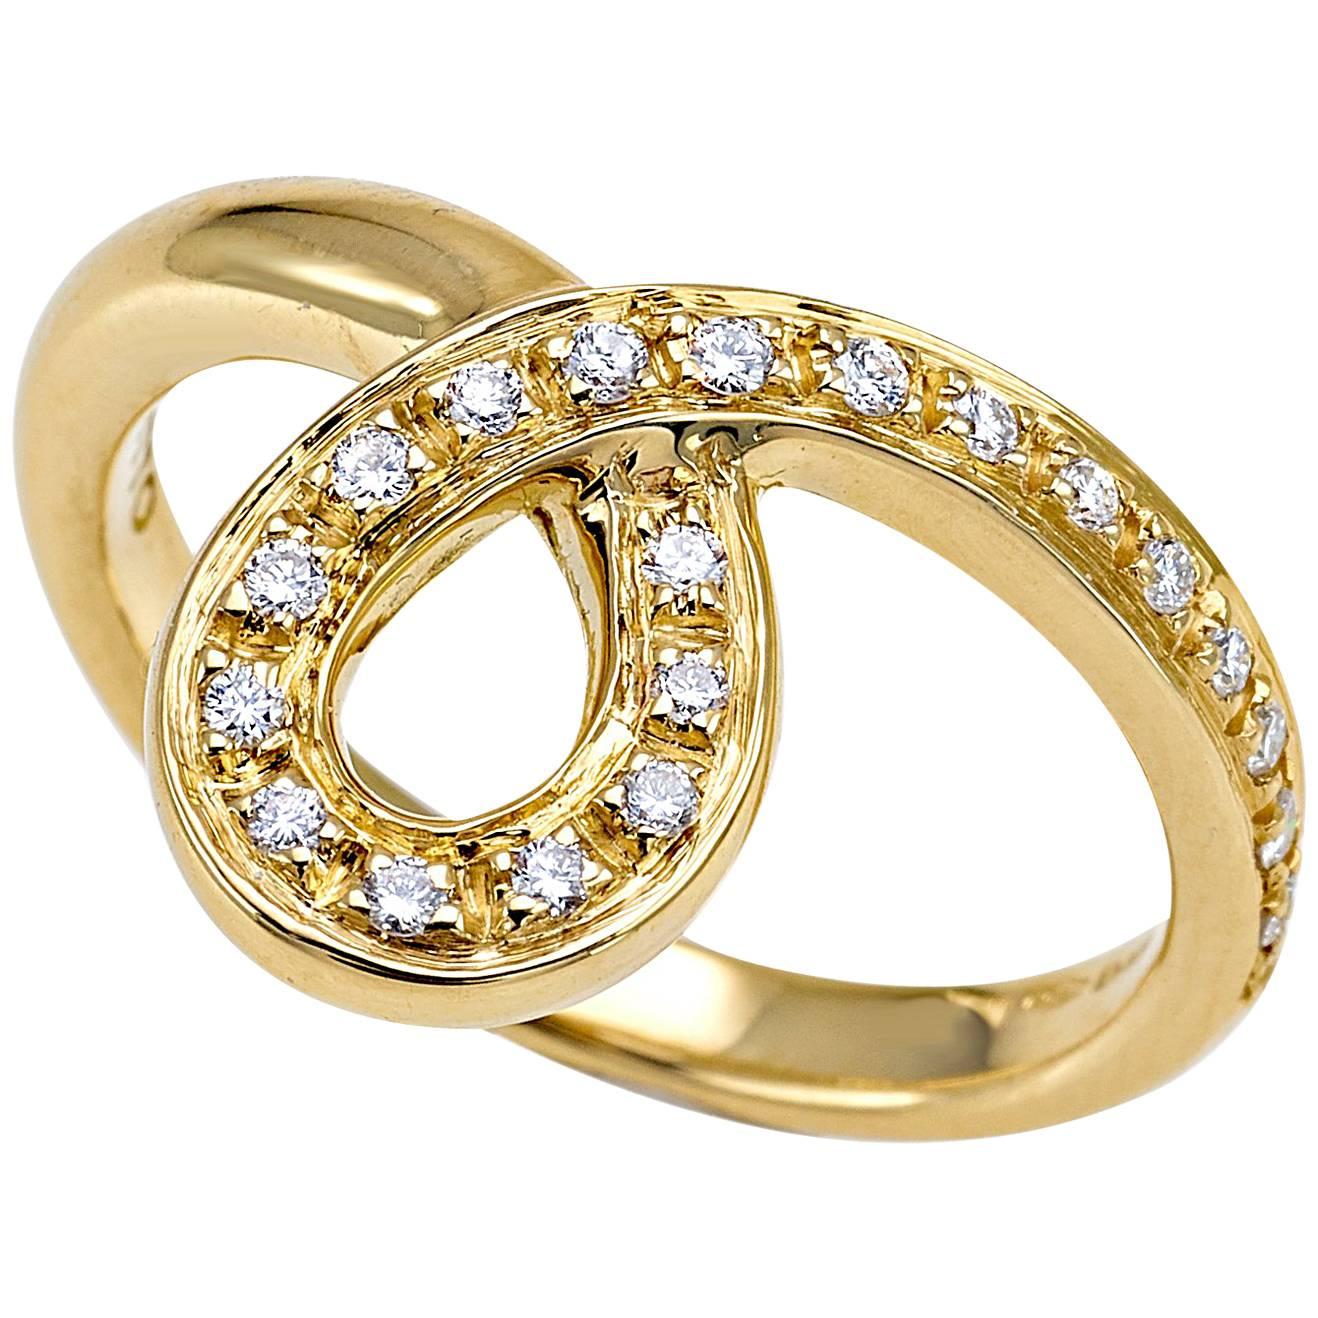 Ring from the Collection "Essence" 18 Karat Yellow Gold and Diamonds